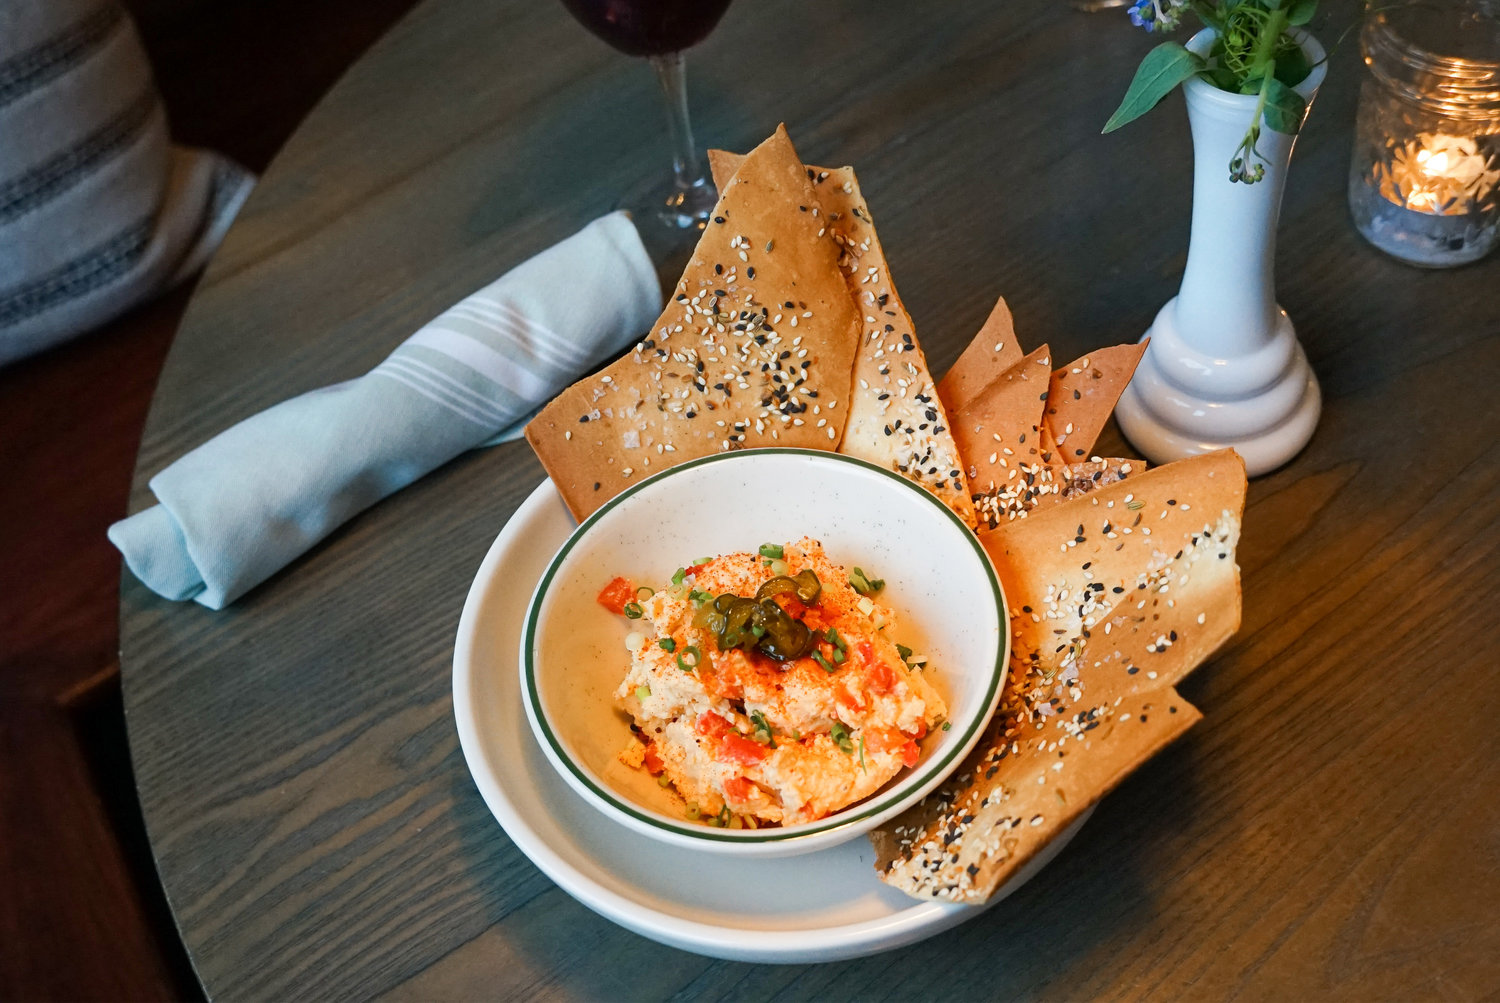 Hunky Dory specializes in Southern-style eats like pimento cheese dip